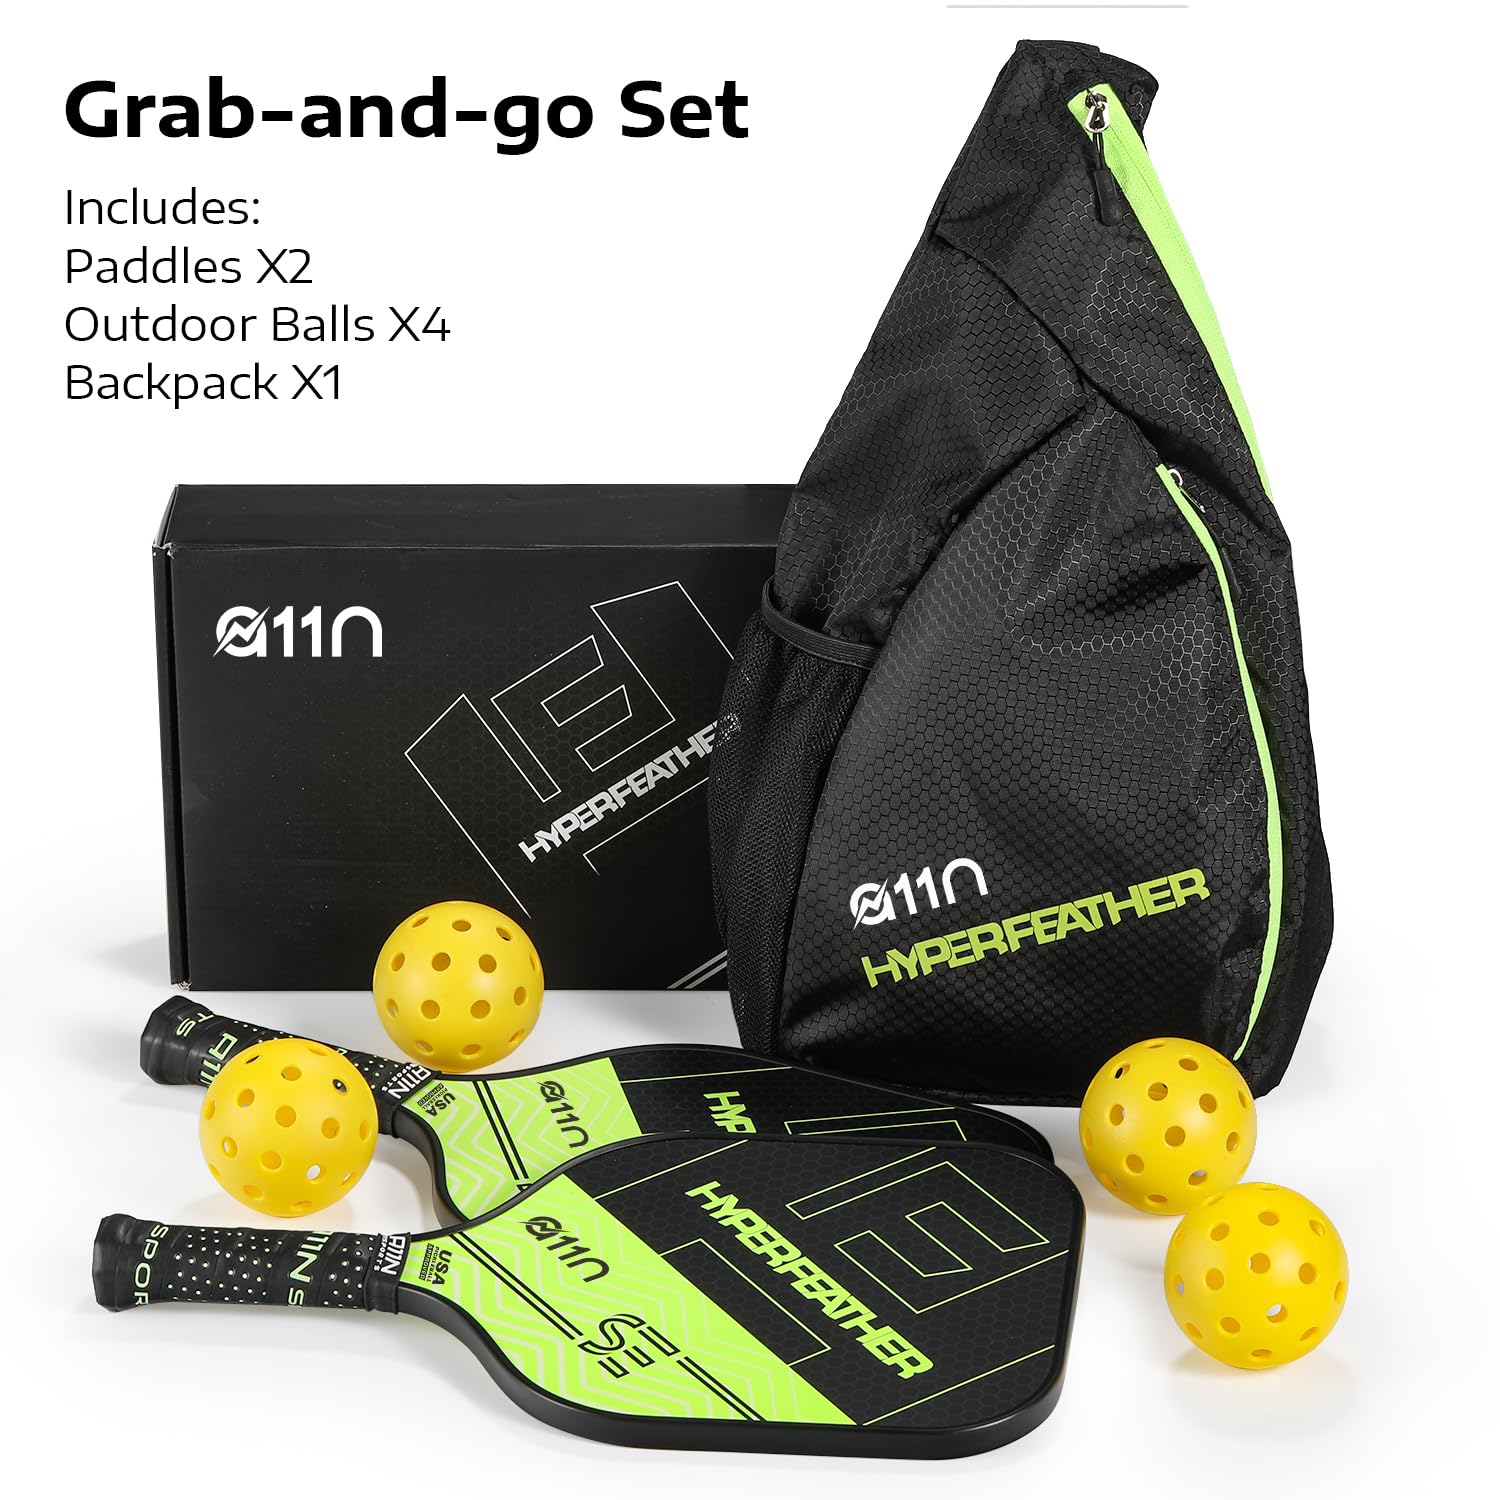 A11N Pickleball Paddles Set of 2 - USAPA Approved | 8OZ, Graphite Face & Polymer Core, Cushion Grip | 4 Balls, 1 Sling Bag, Shiny Green